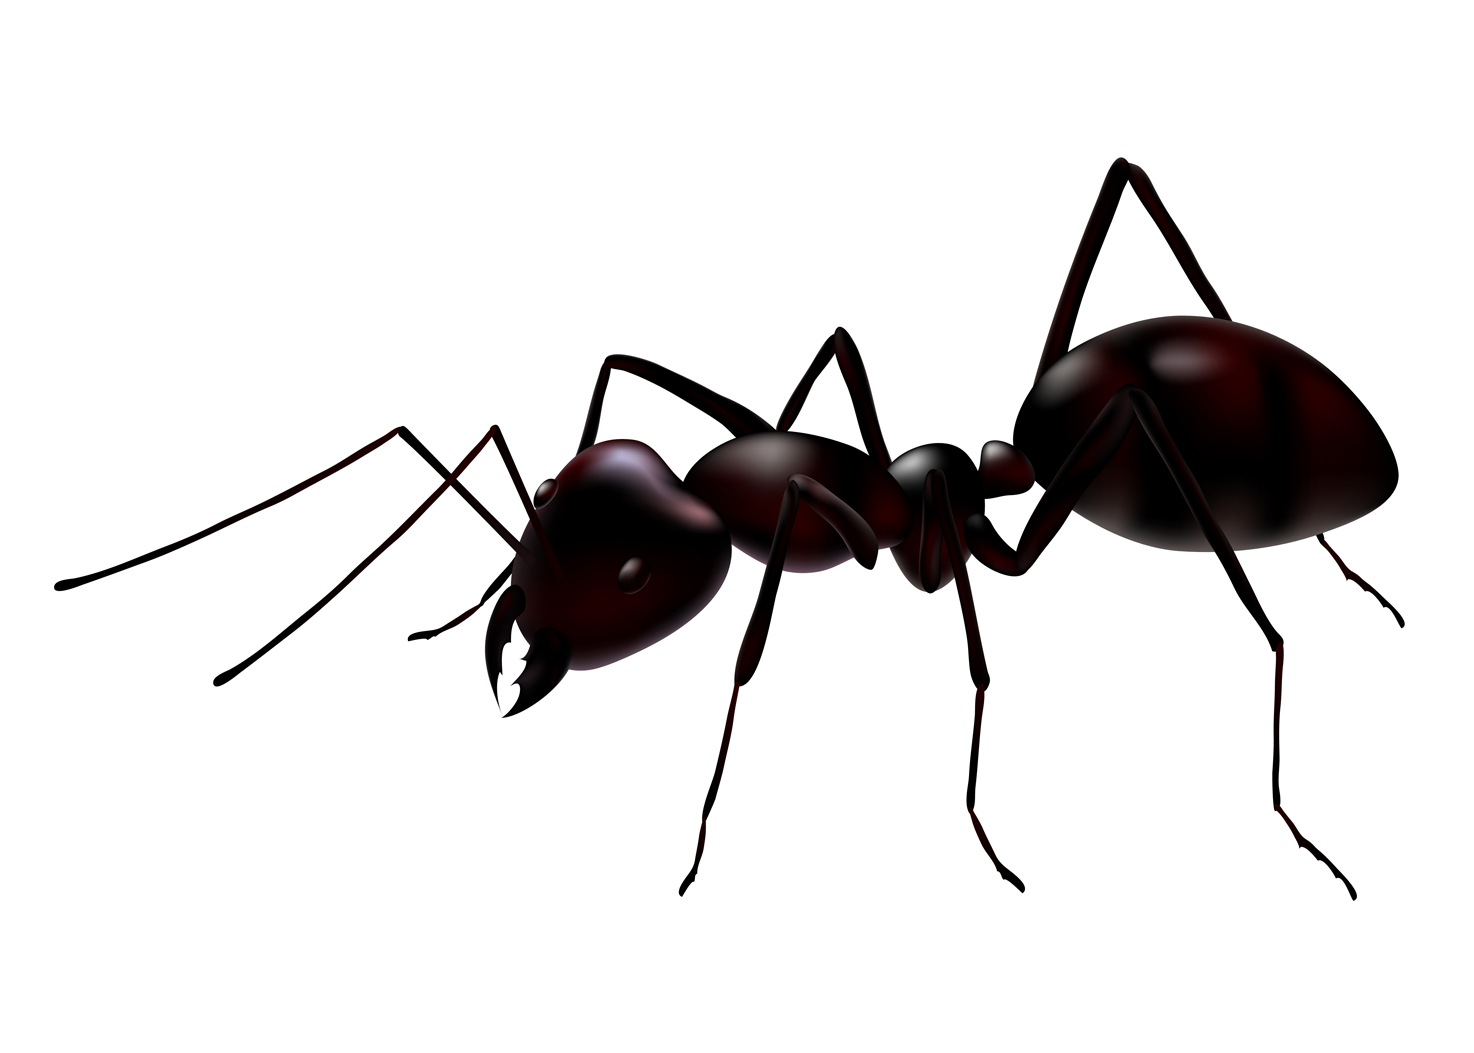 How many legs do ants have?